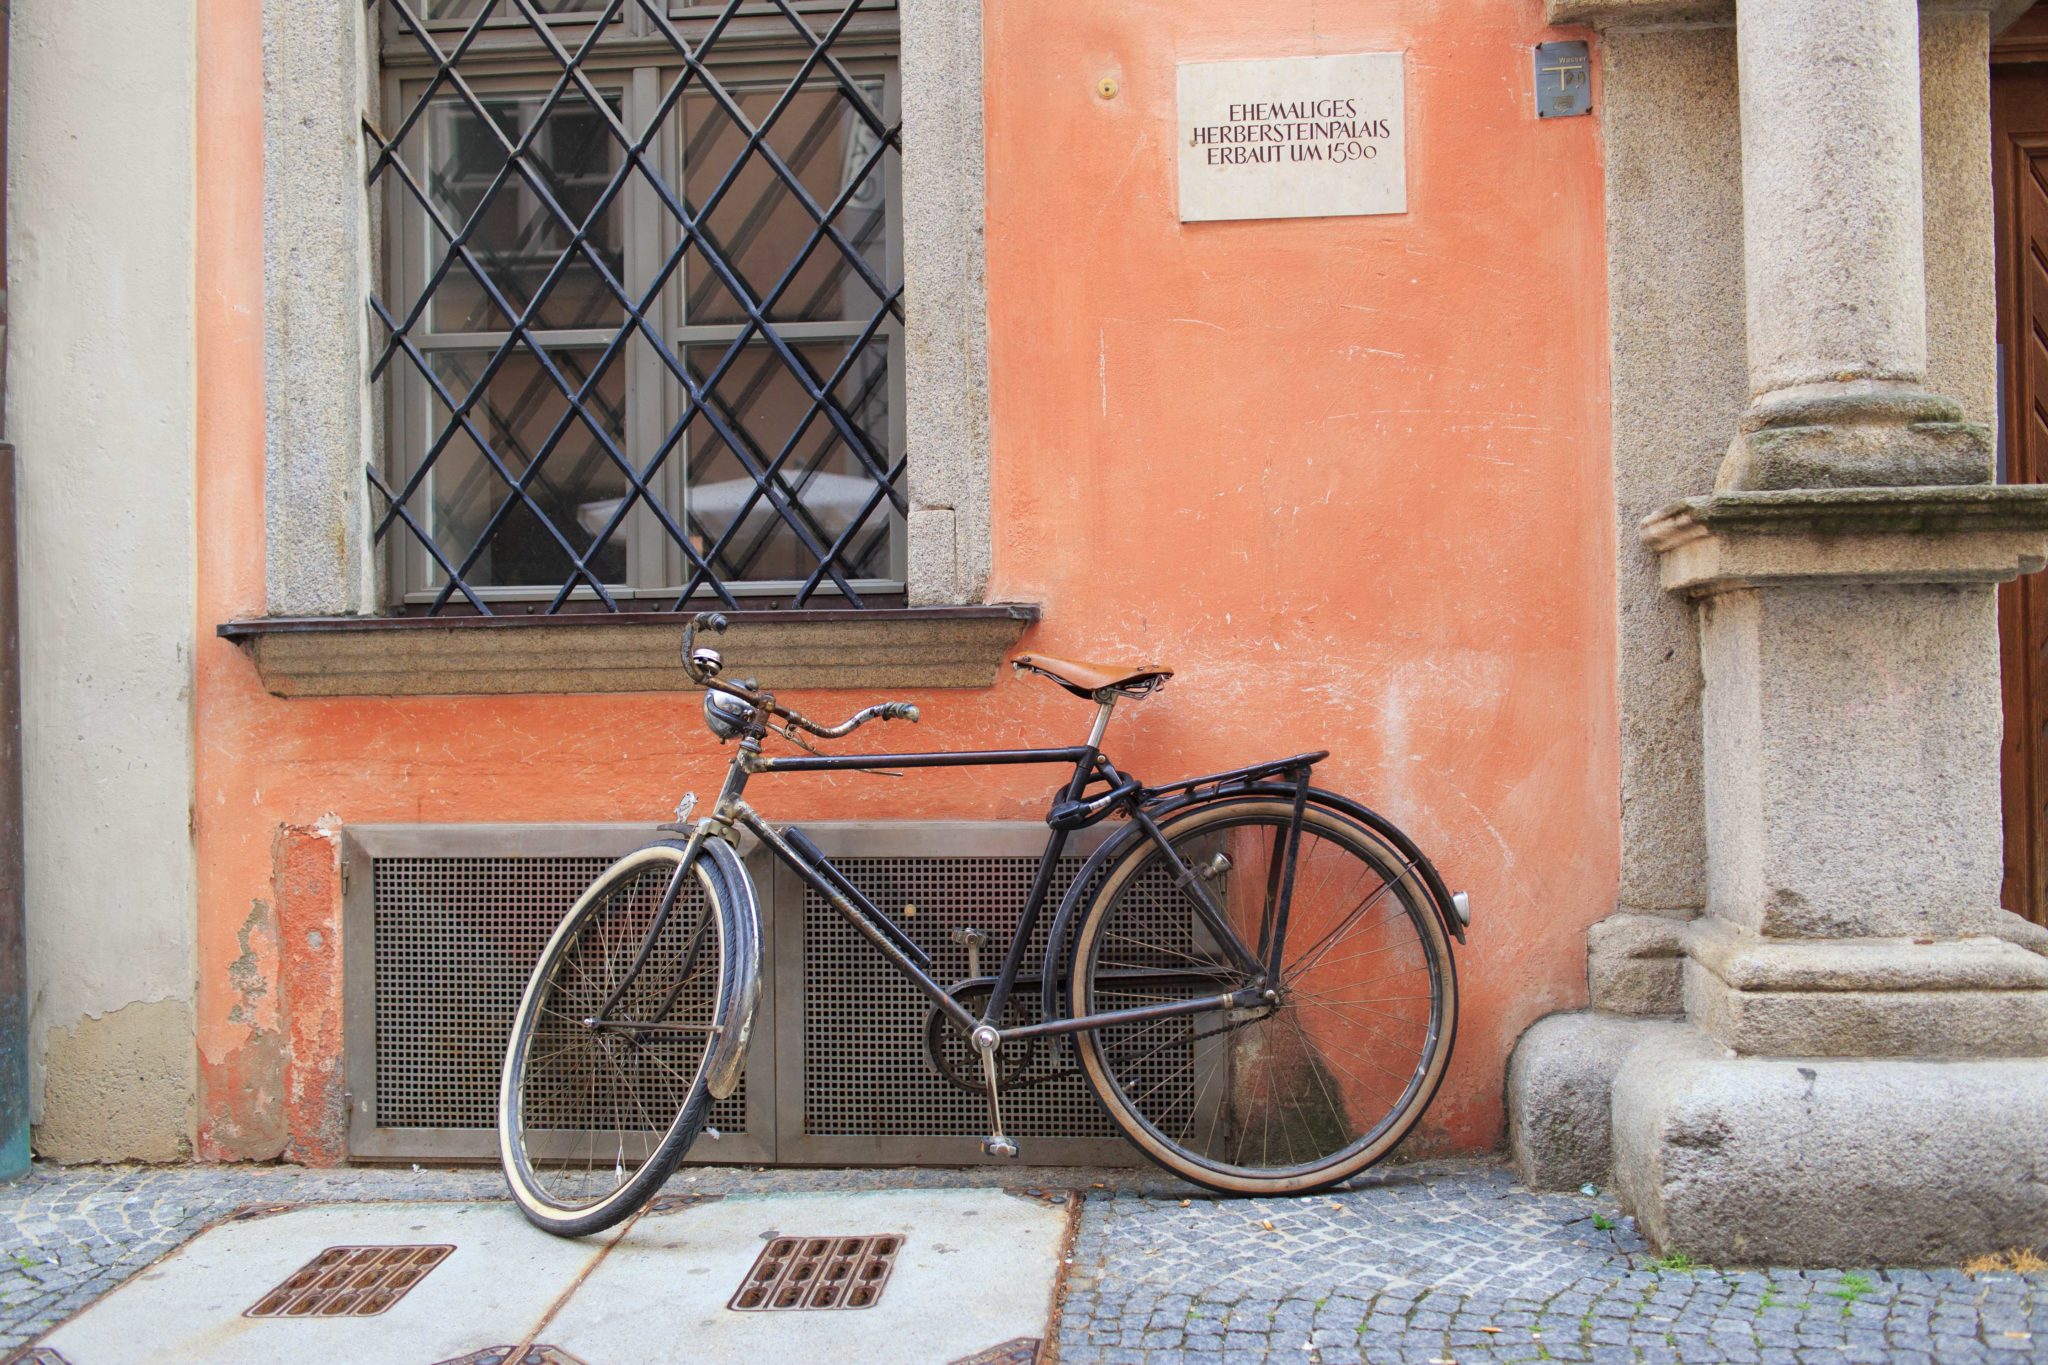 Bicycle in Passau on the Danube Bicycle Path